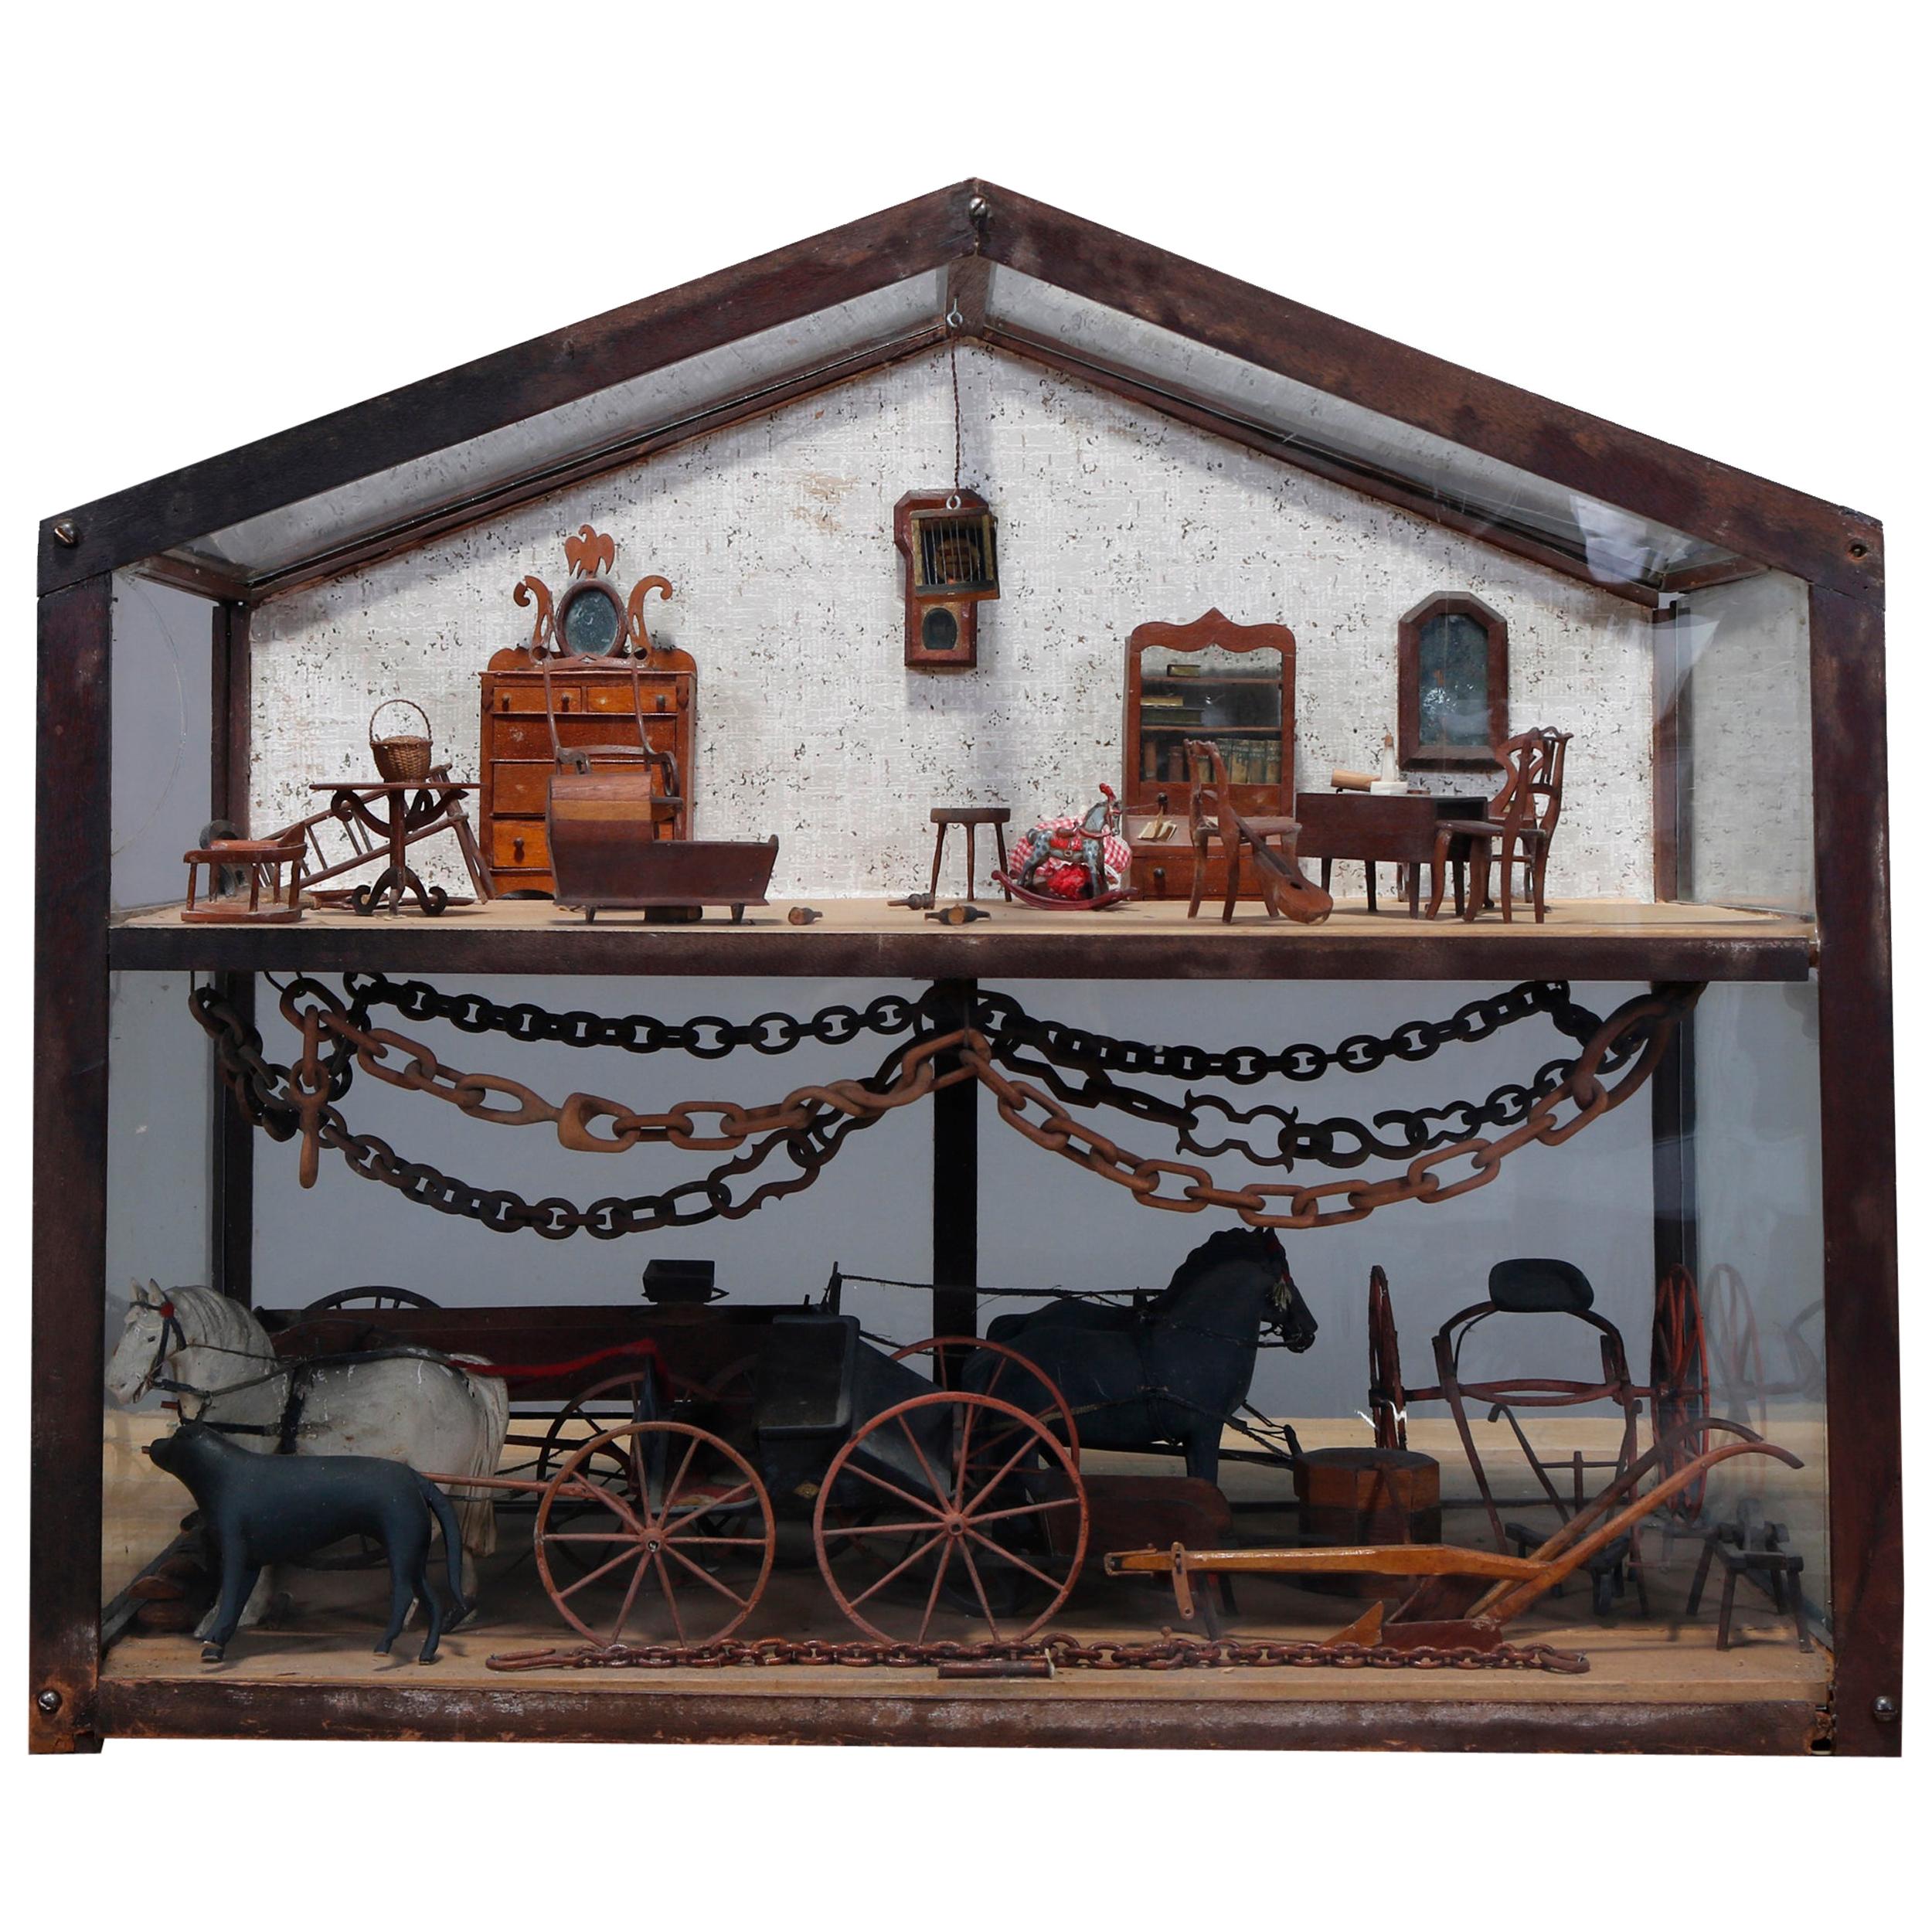 An antique Folk Art diorama depicts carriage house with glass panels in wood frame and having upstairs living quarters with hand carved wood miniature furniture and lower room with horses, wood chain and various carriages, c 1850’s.

Measures: 22